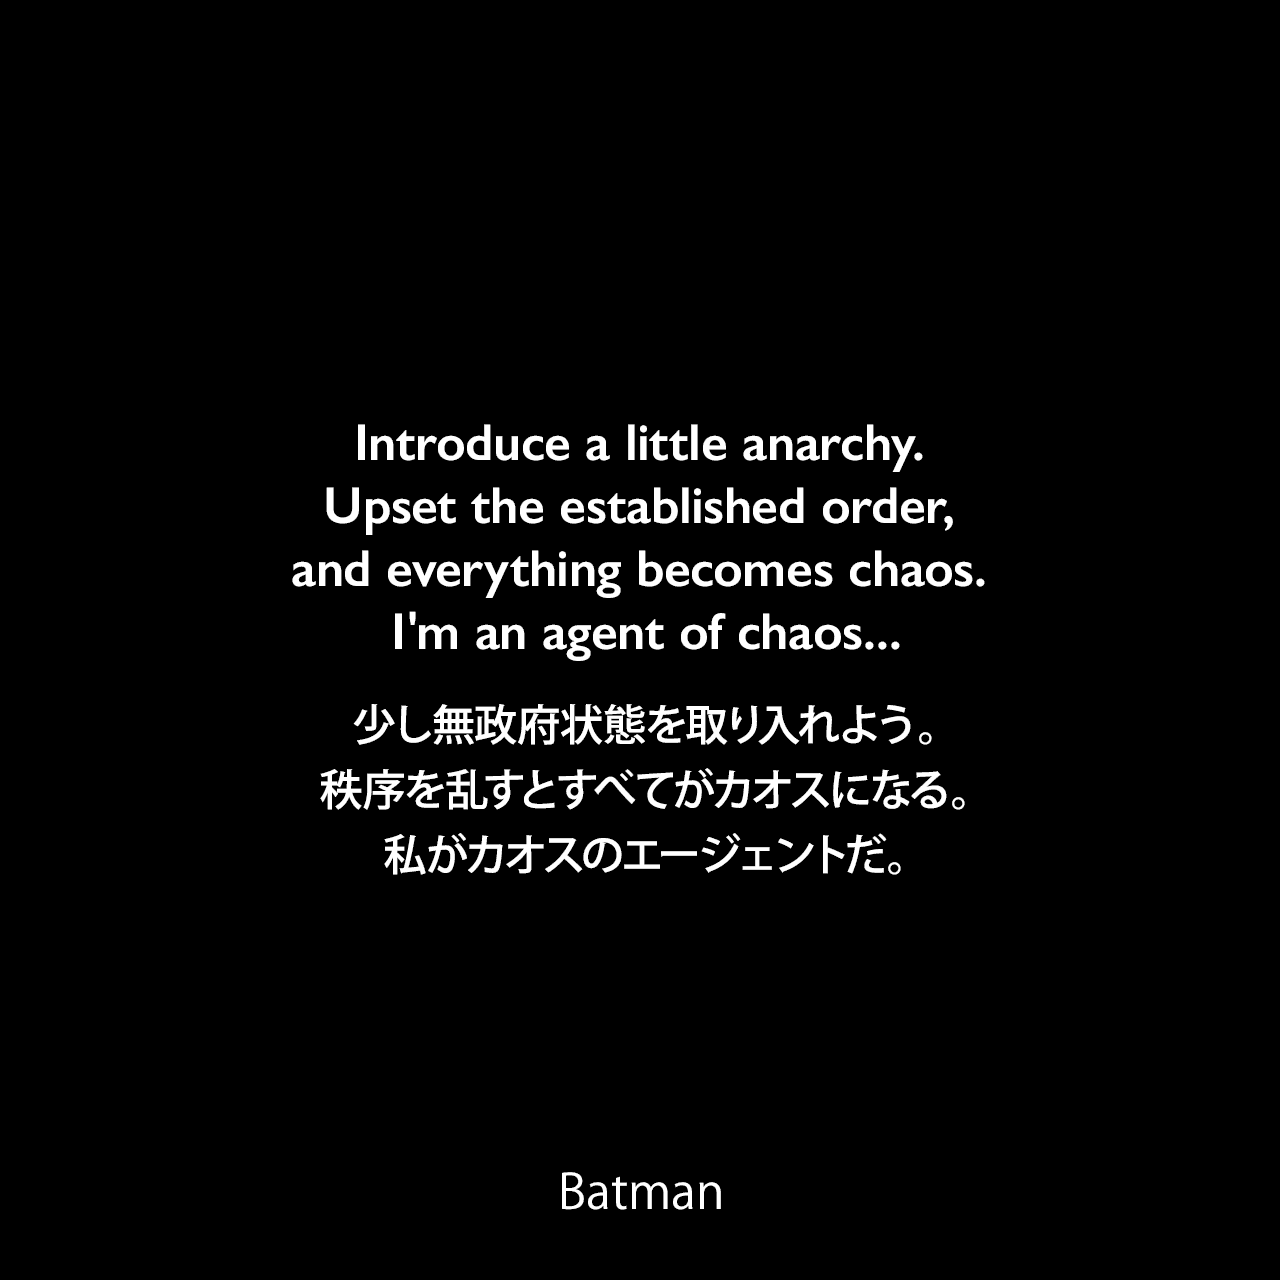 Introduce a little anarchy. Upset the established order, and everything becomes chaos. I'm an agent of chaos...少し無政府状態を取り入れよう。秩序を乱すとすべてがカオスになる。私がカオスのエージェントだ。- Jorker 